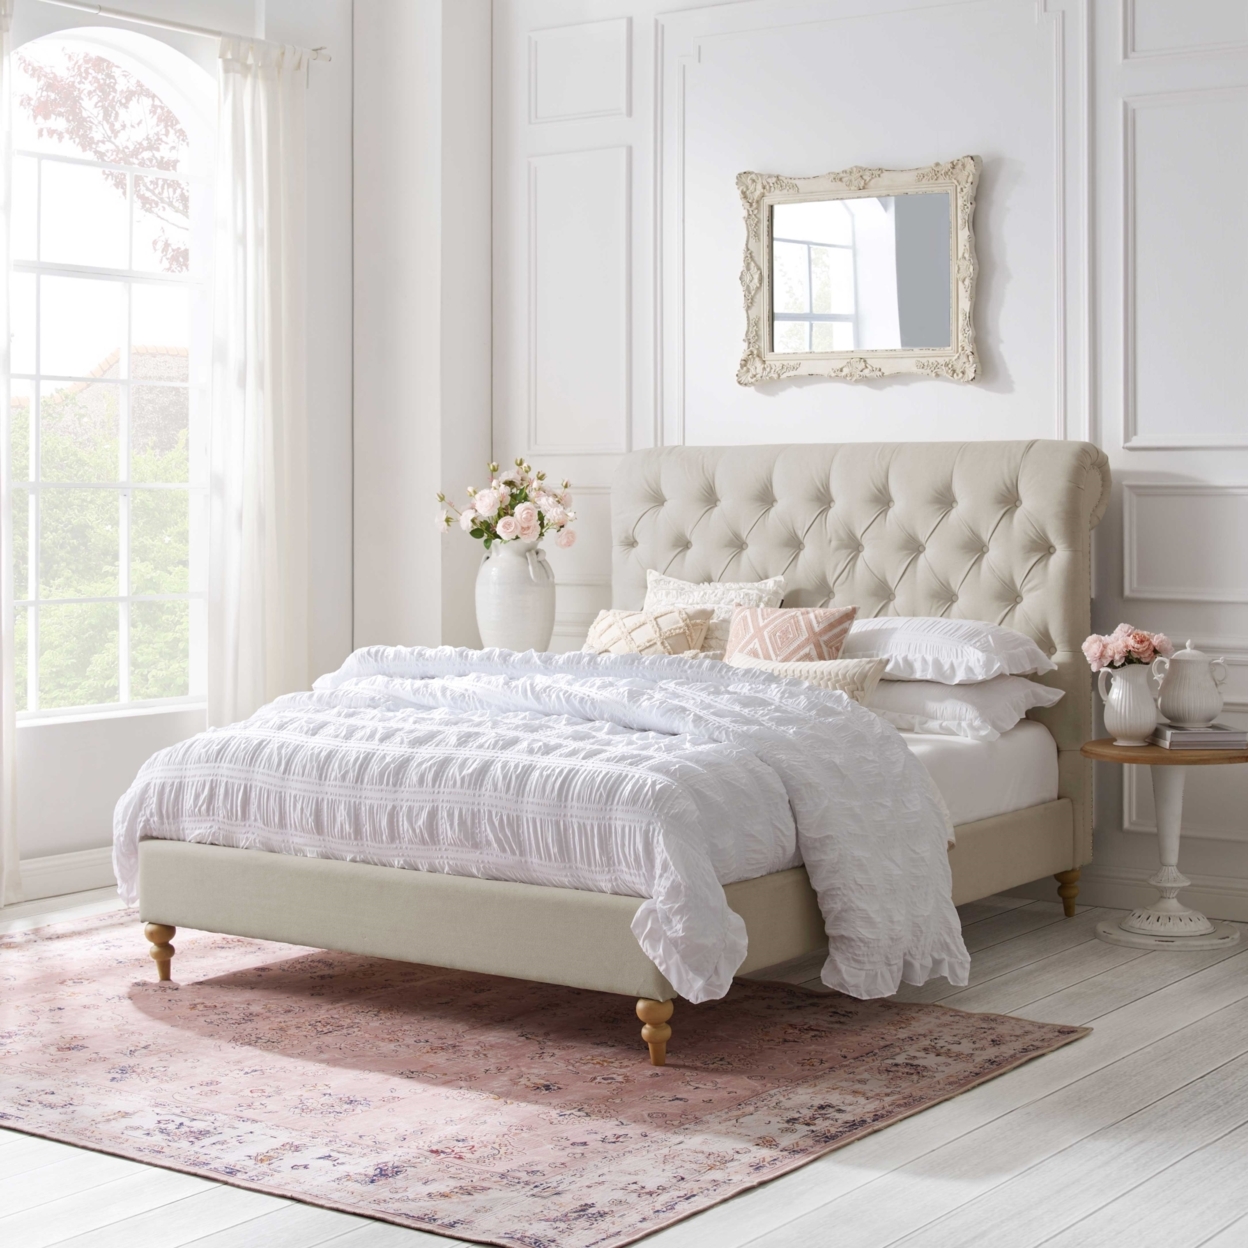 Kailynn Bed-Rolled Top Button Tufted-Nailhead Trim-Slats Included - Beige, King